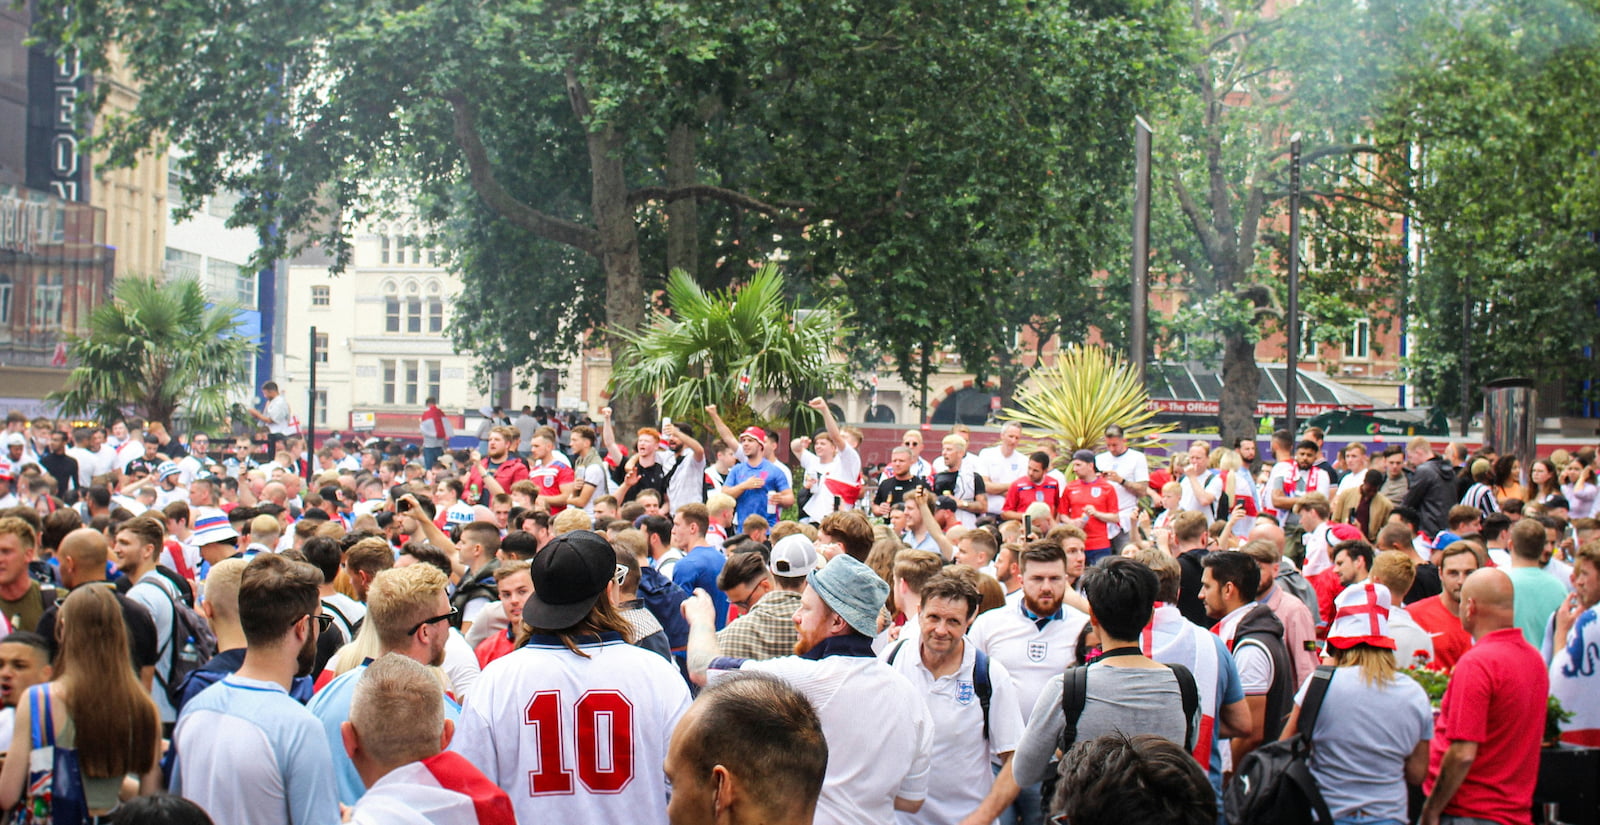 England fans gather in a public place for a major tournament